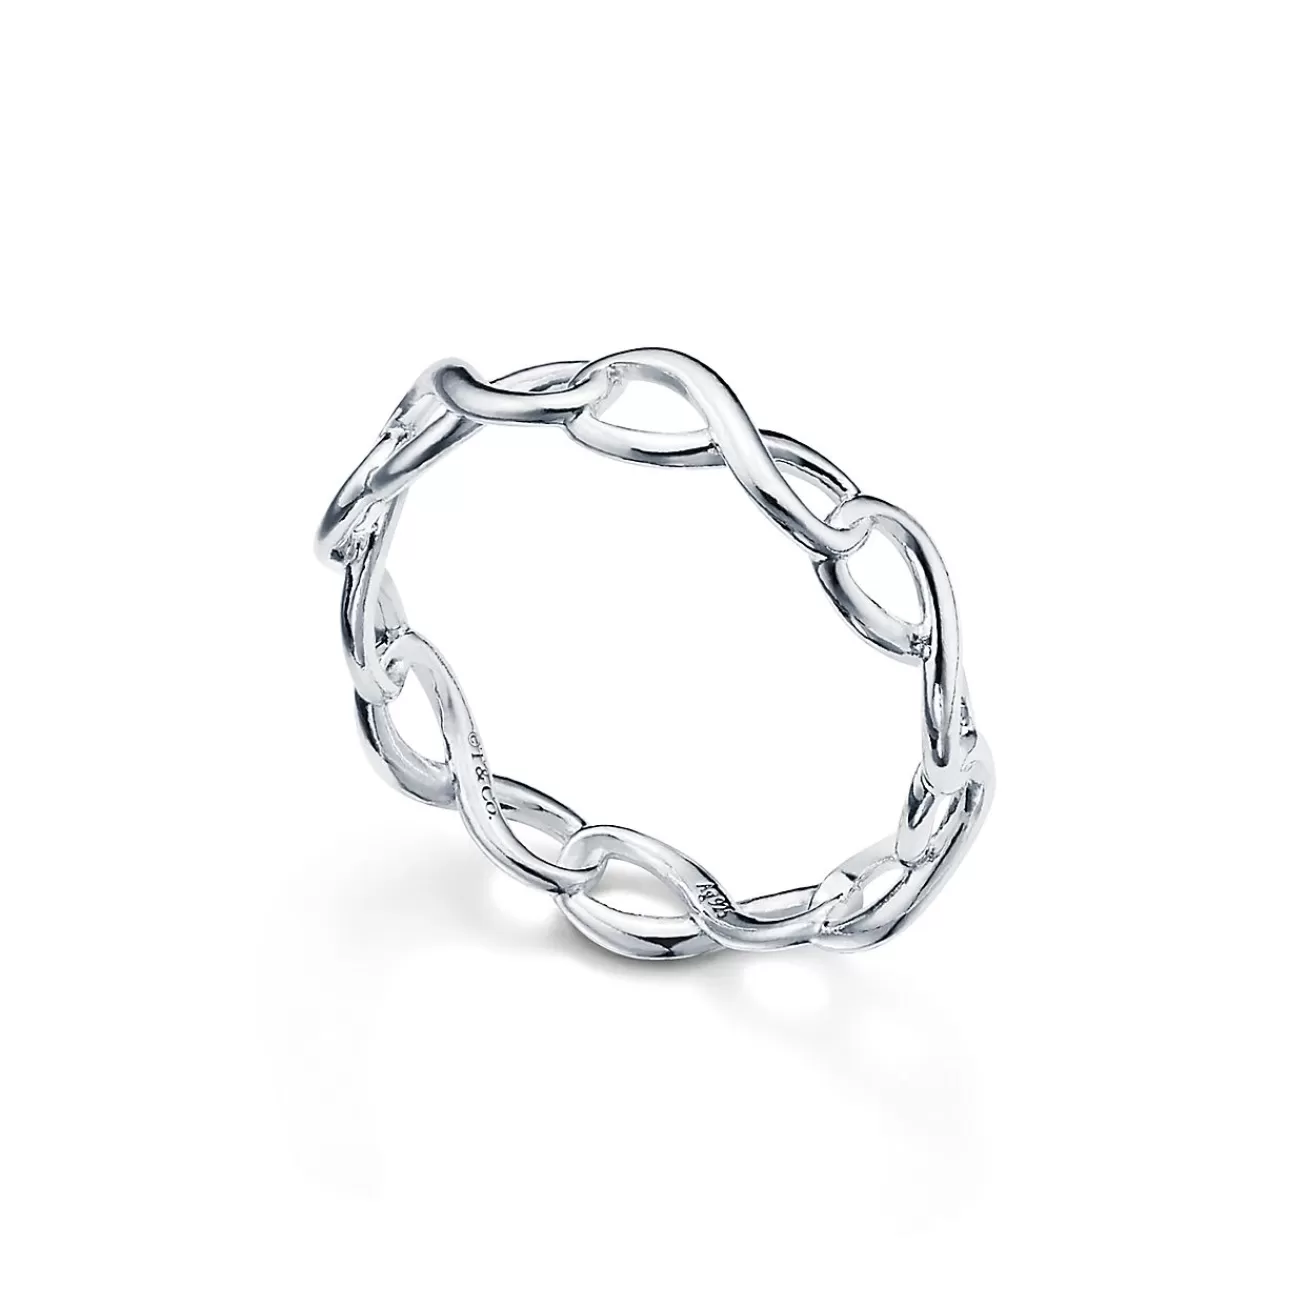 Tiffany & Co. Tiffany Infinity narrow band ring in sterling silver | ^ Rings | Sterling Silver Jewelry